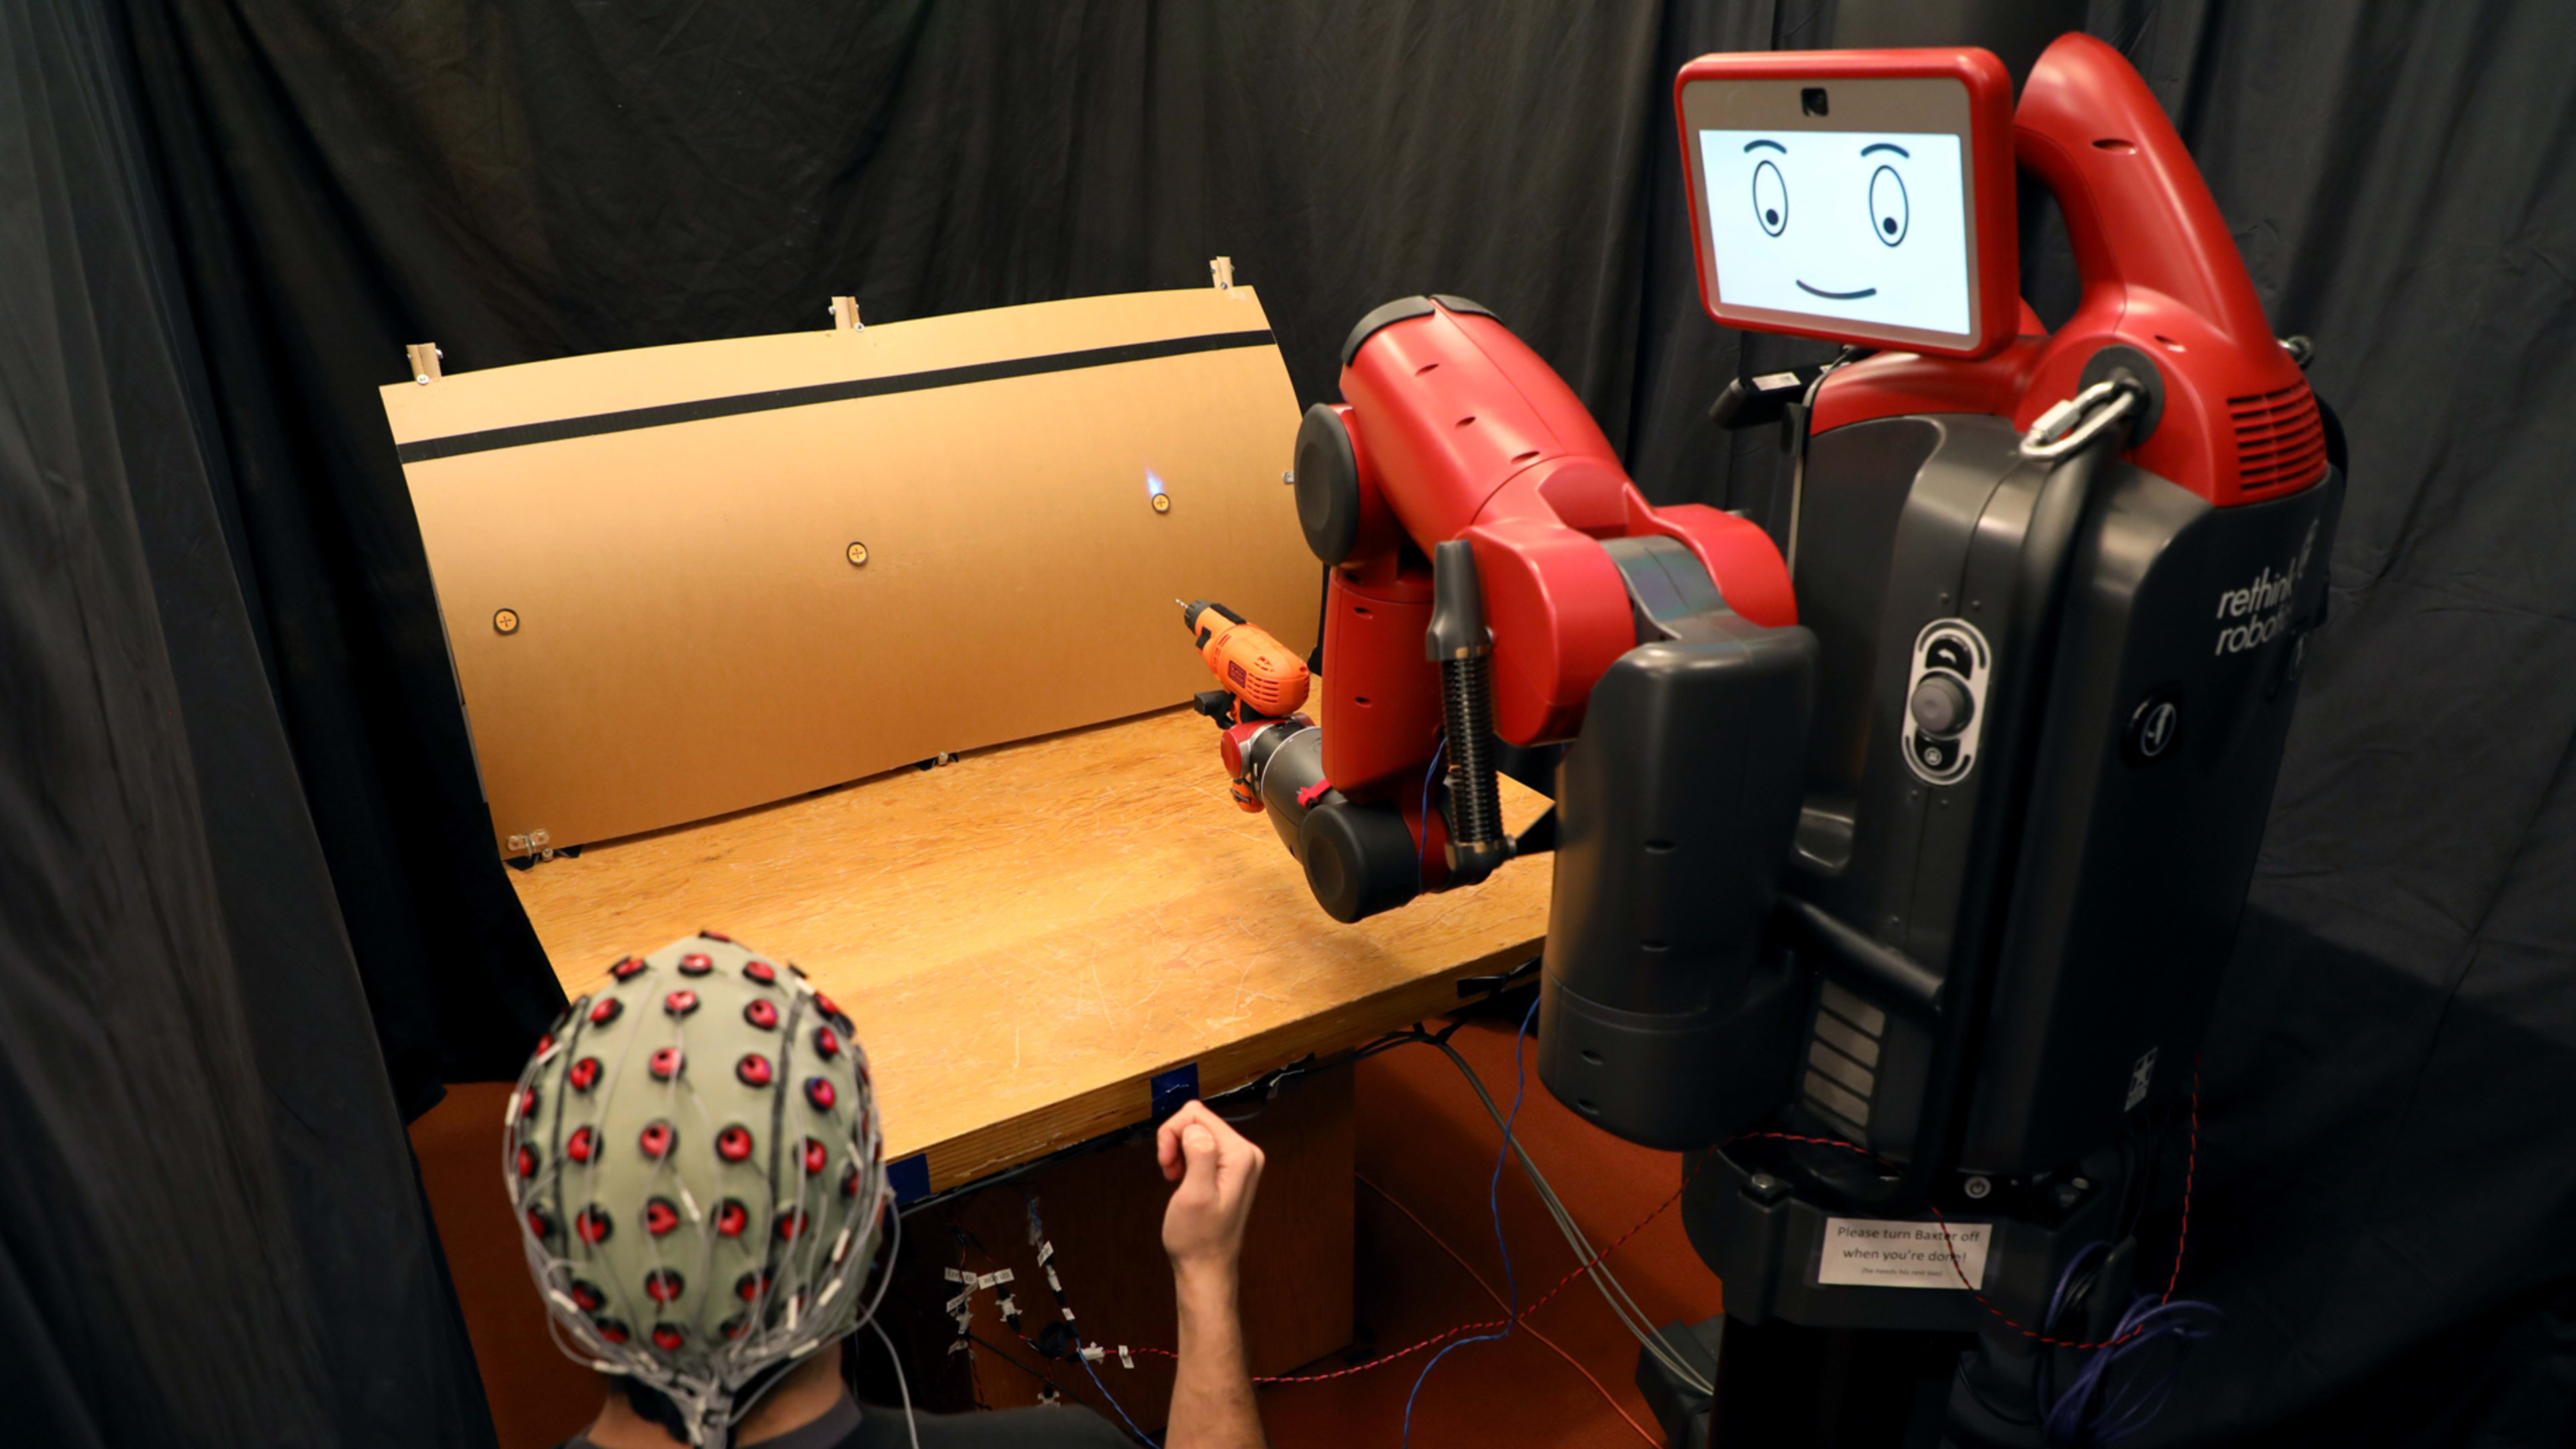 Oops! This MIT robot knows it made a mistake by reading human brainwaves